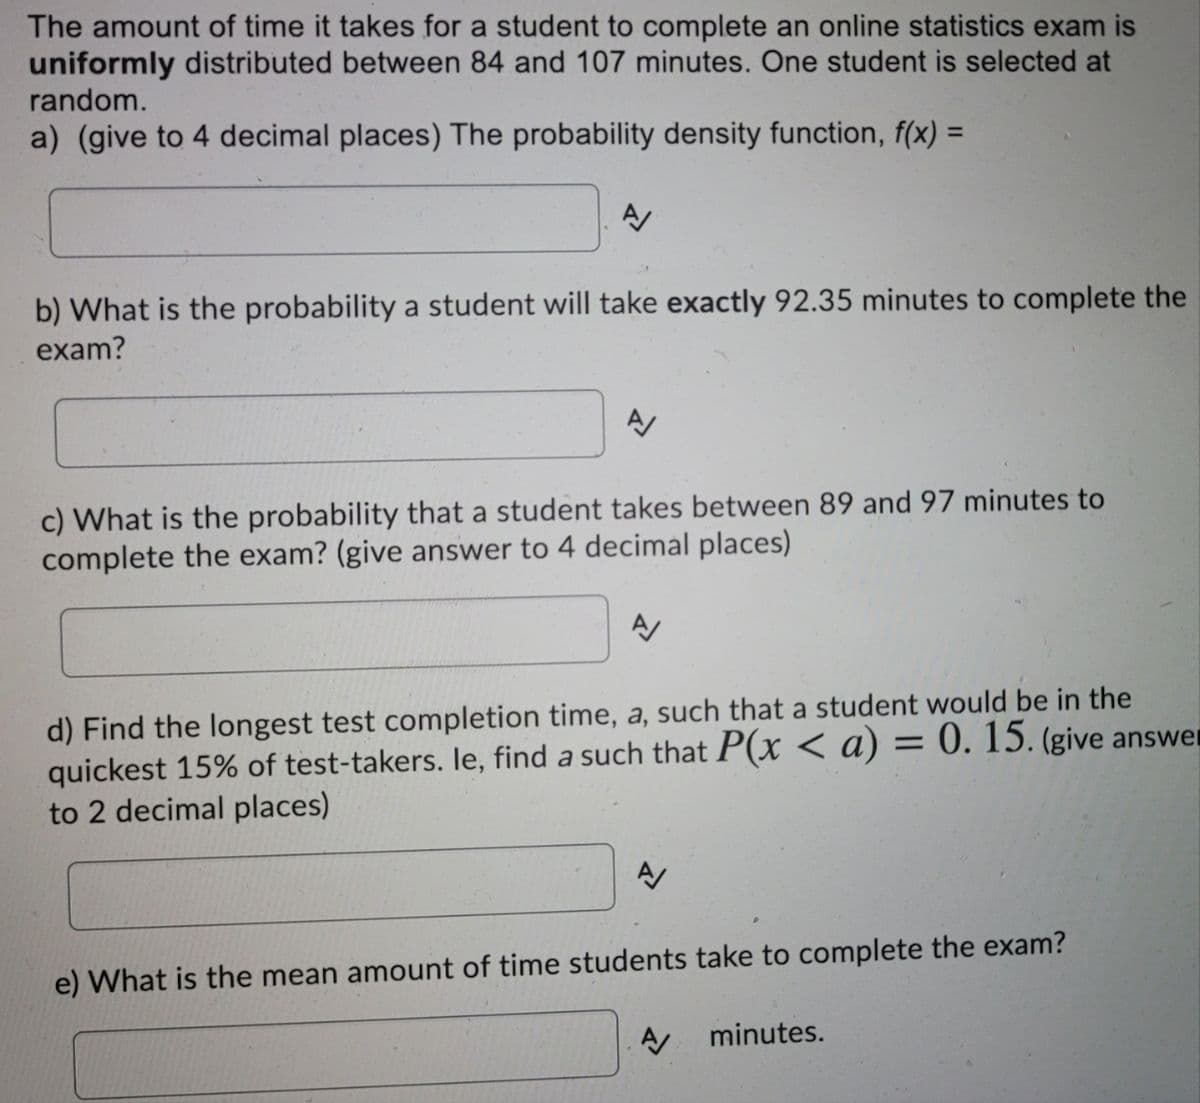 The amount of time it takes for a student to complete an online statistics exam is
uniformly distributed between 84 and 107 minutes. One student is selected at
random.
a) (give to 4 decimal places) The probability density function, f(x) =
b) What is the probability a student will take exactly 92.35 minutes to complete the
exam?
A/
c) What is the probability that a student takes between 89 and 97 minutes to
complete the exam? (give answer to 4 decimal places)
A
d) Find the longest test completion time, a, such that a student would be in the
quickest 15% of test-takers. le, find a such that P(x < a) = 0. 15. (give answer
to 2 decimal places)
A
e) What is the mean amount of time students take to complete the exam?
A/
minutes.